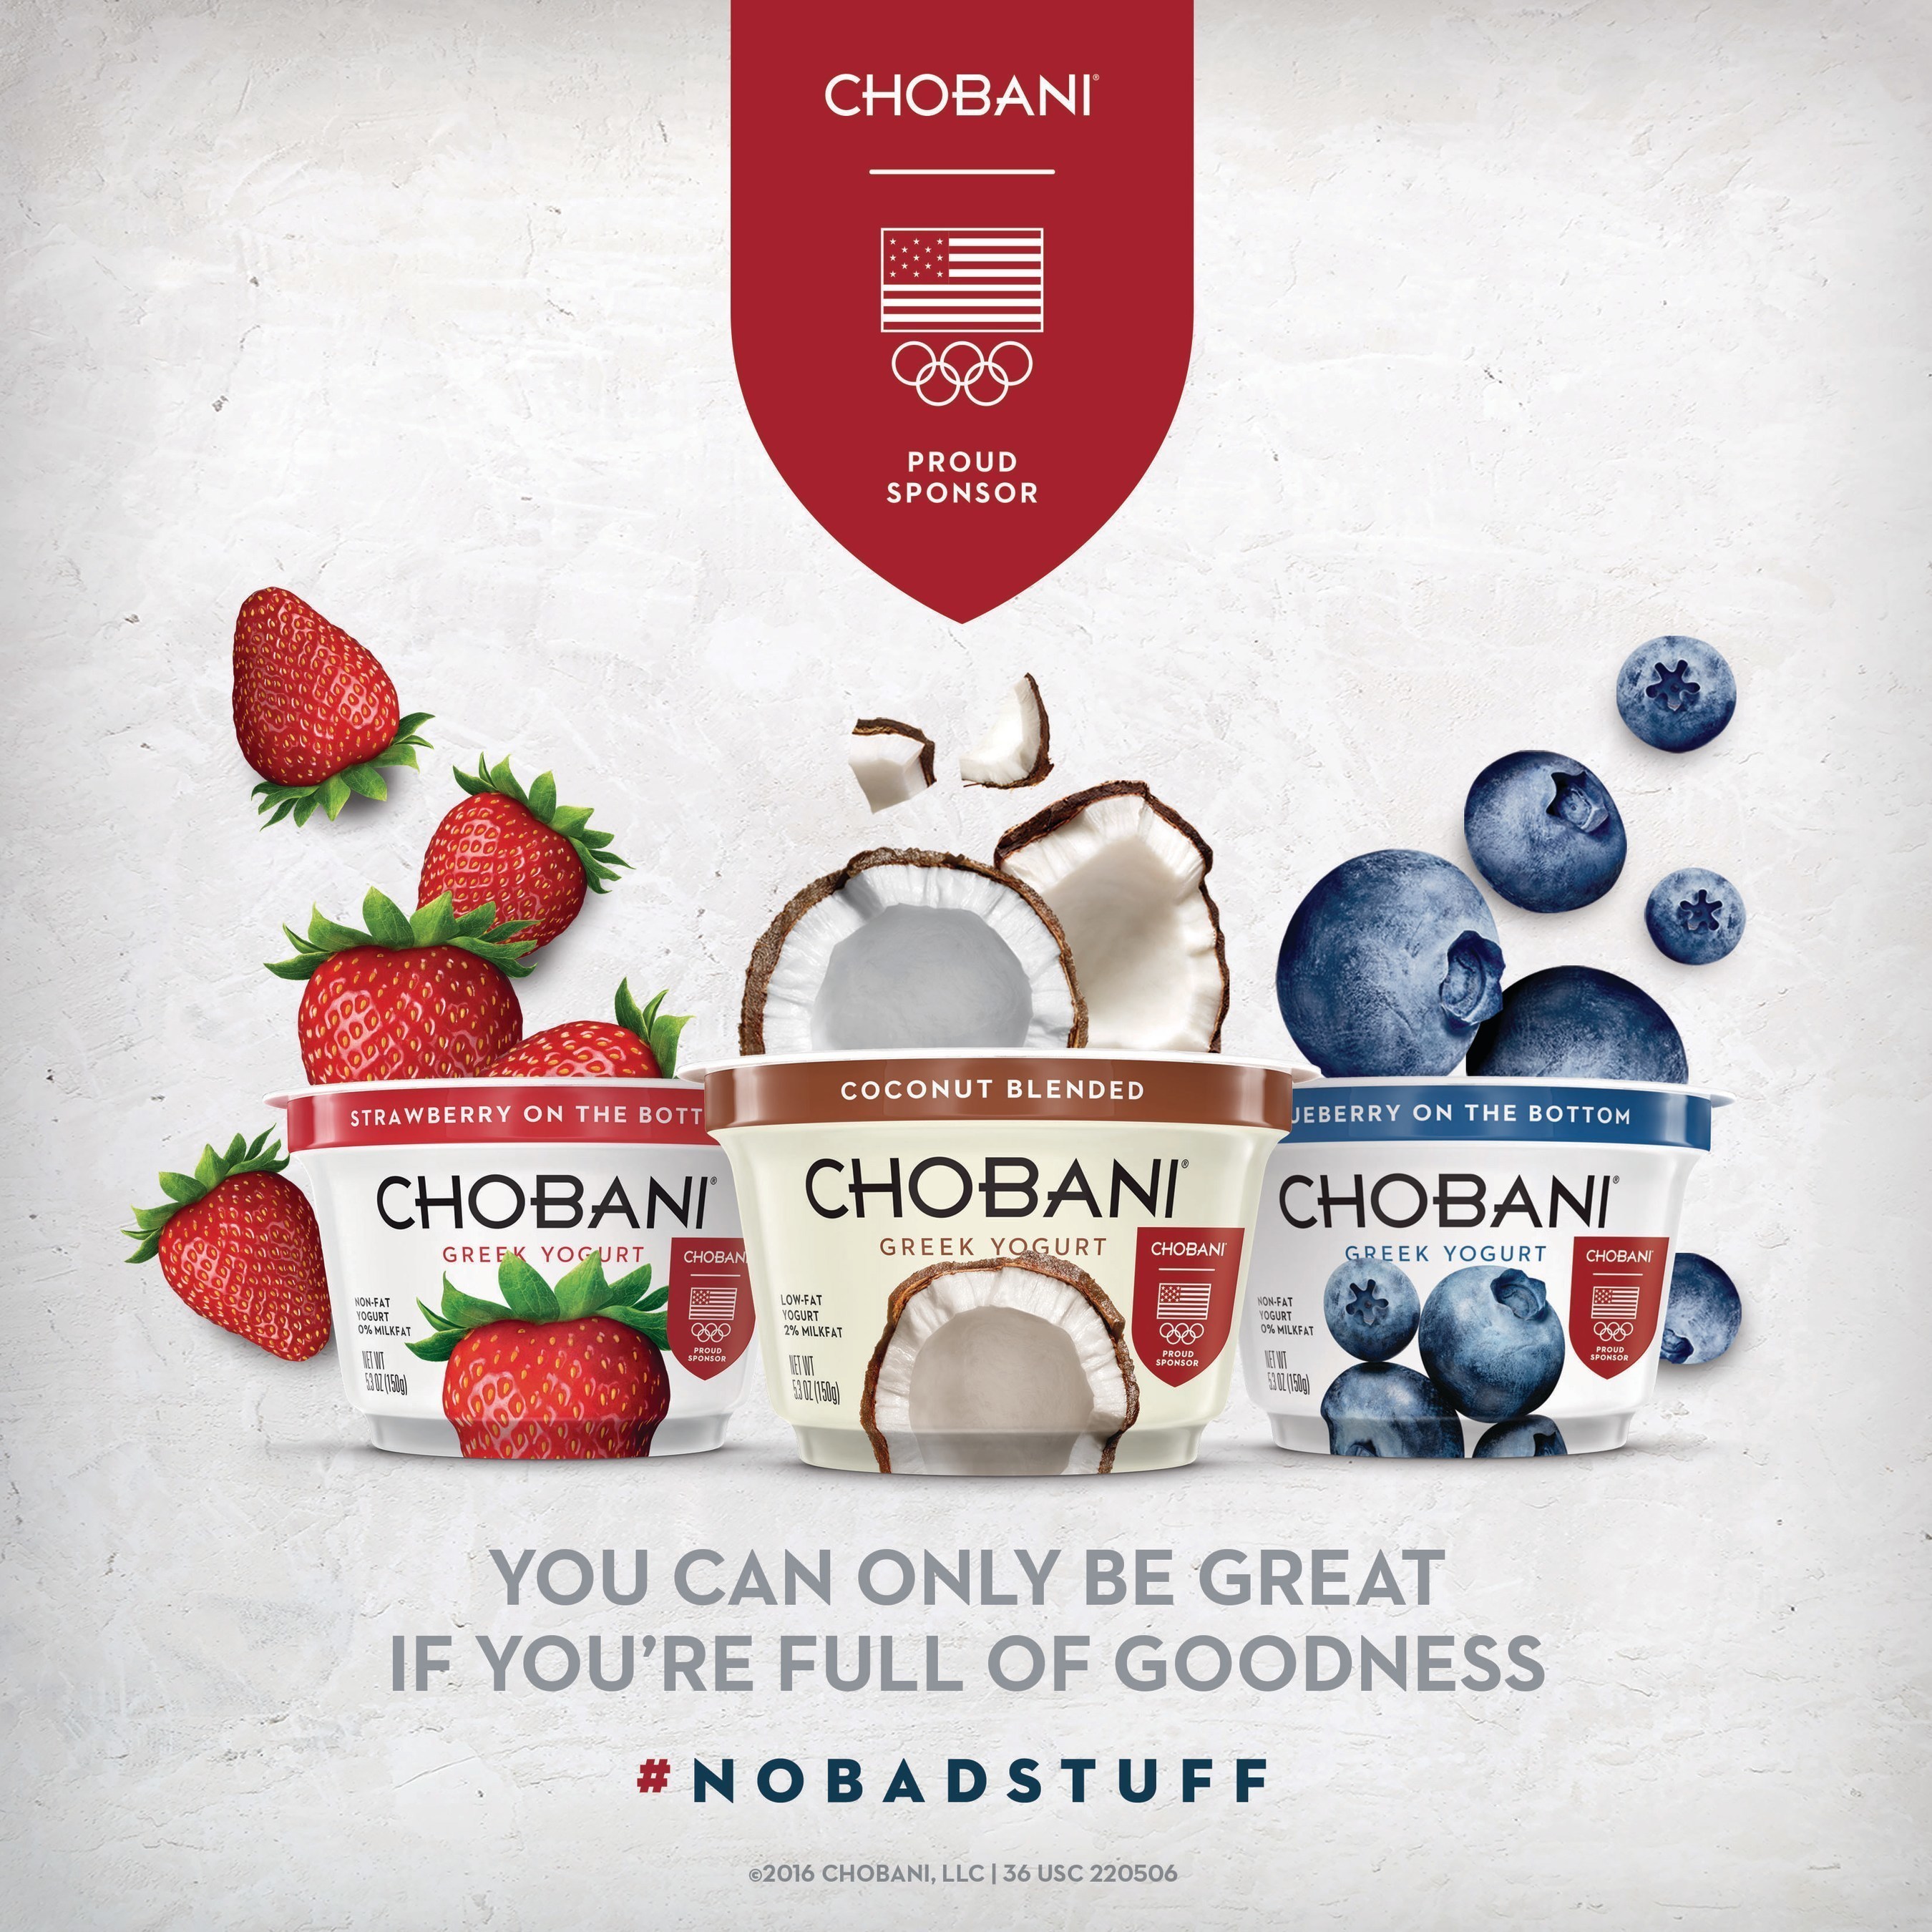 Chobani ad creative will adorn the tagline, "you can only be great if you're full of goodness," a direct quote and practiced mantra of Chobani founder and CEO, Hamdi Ulukaya.